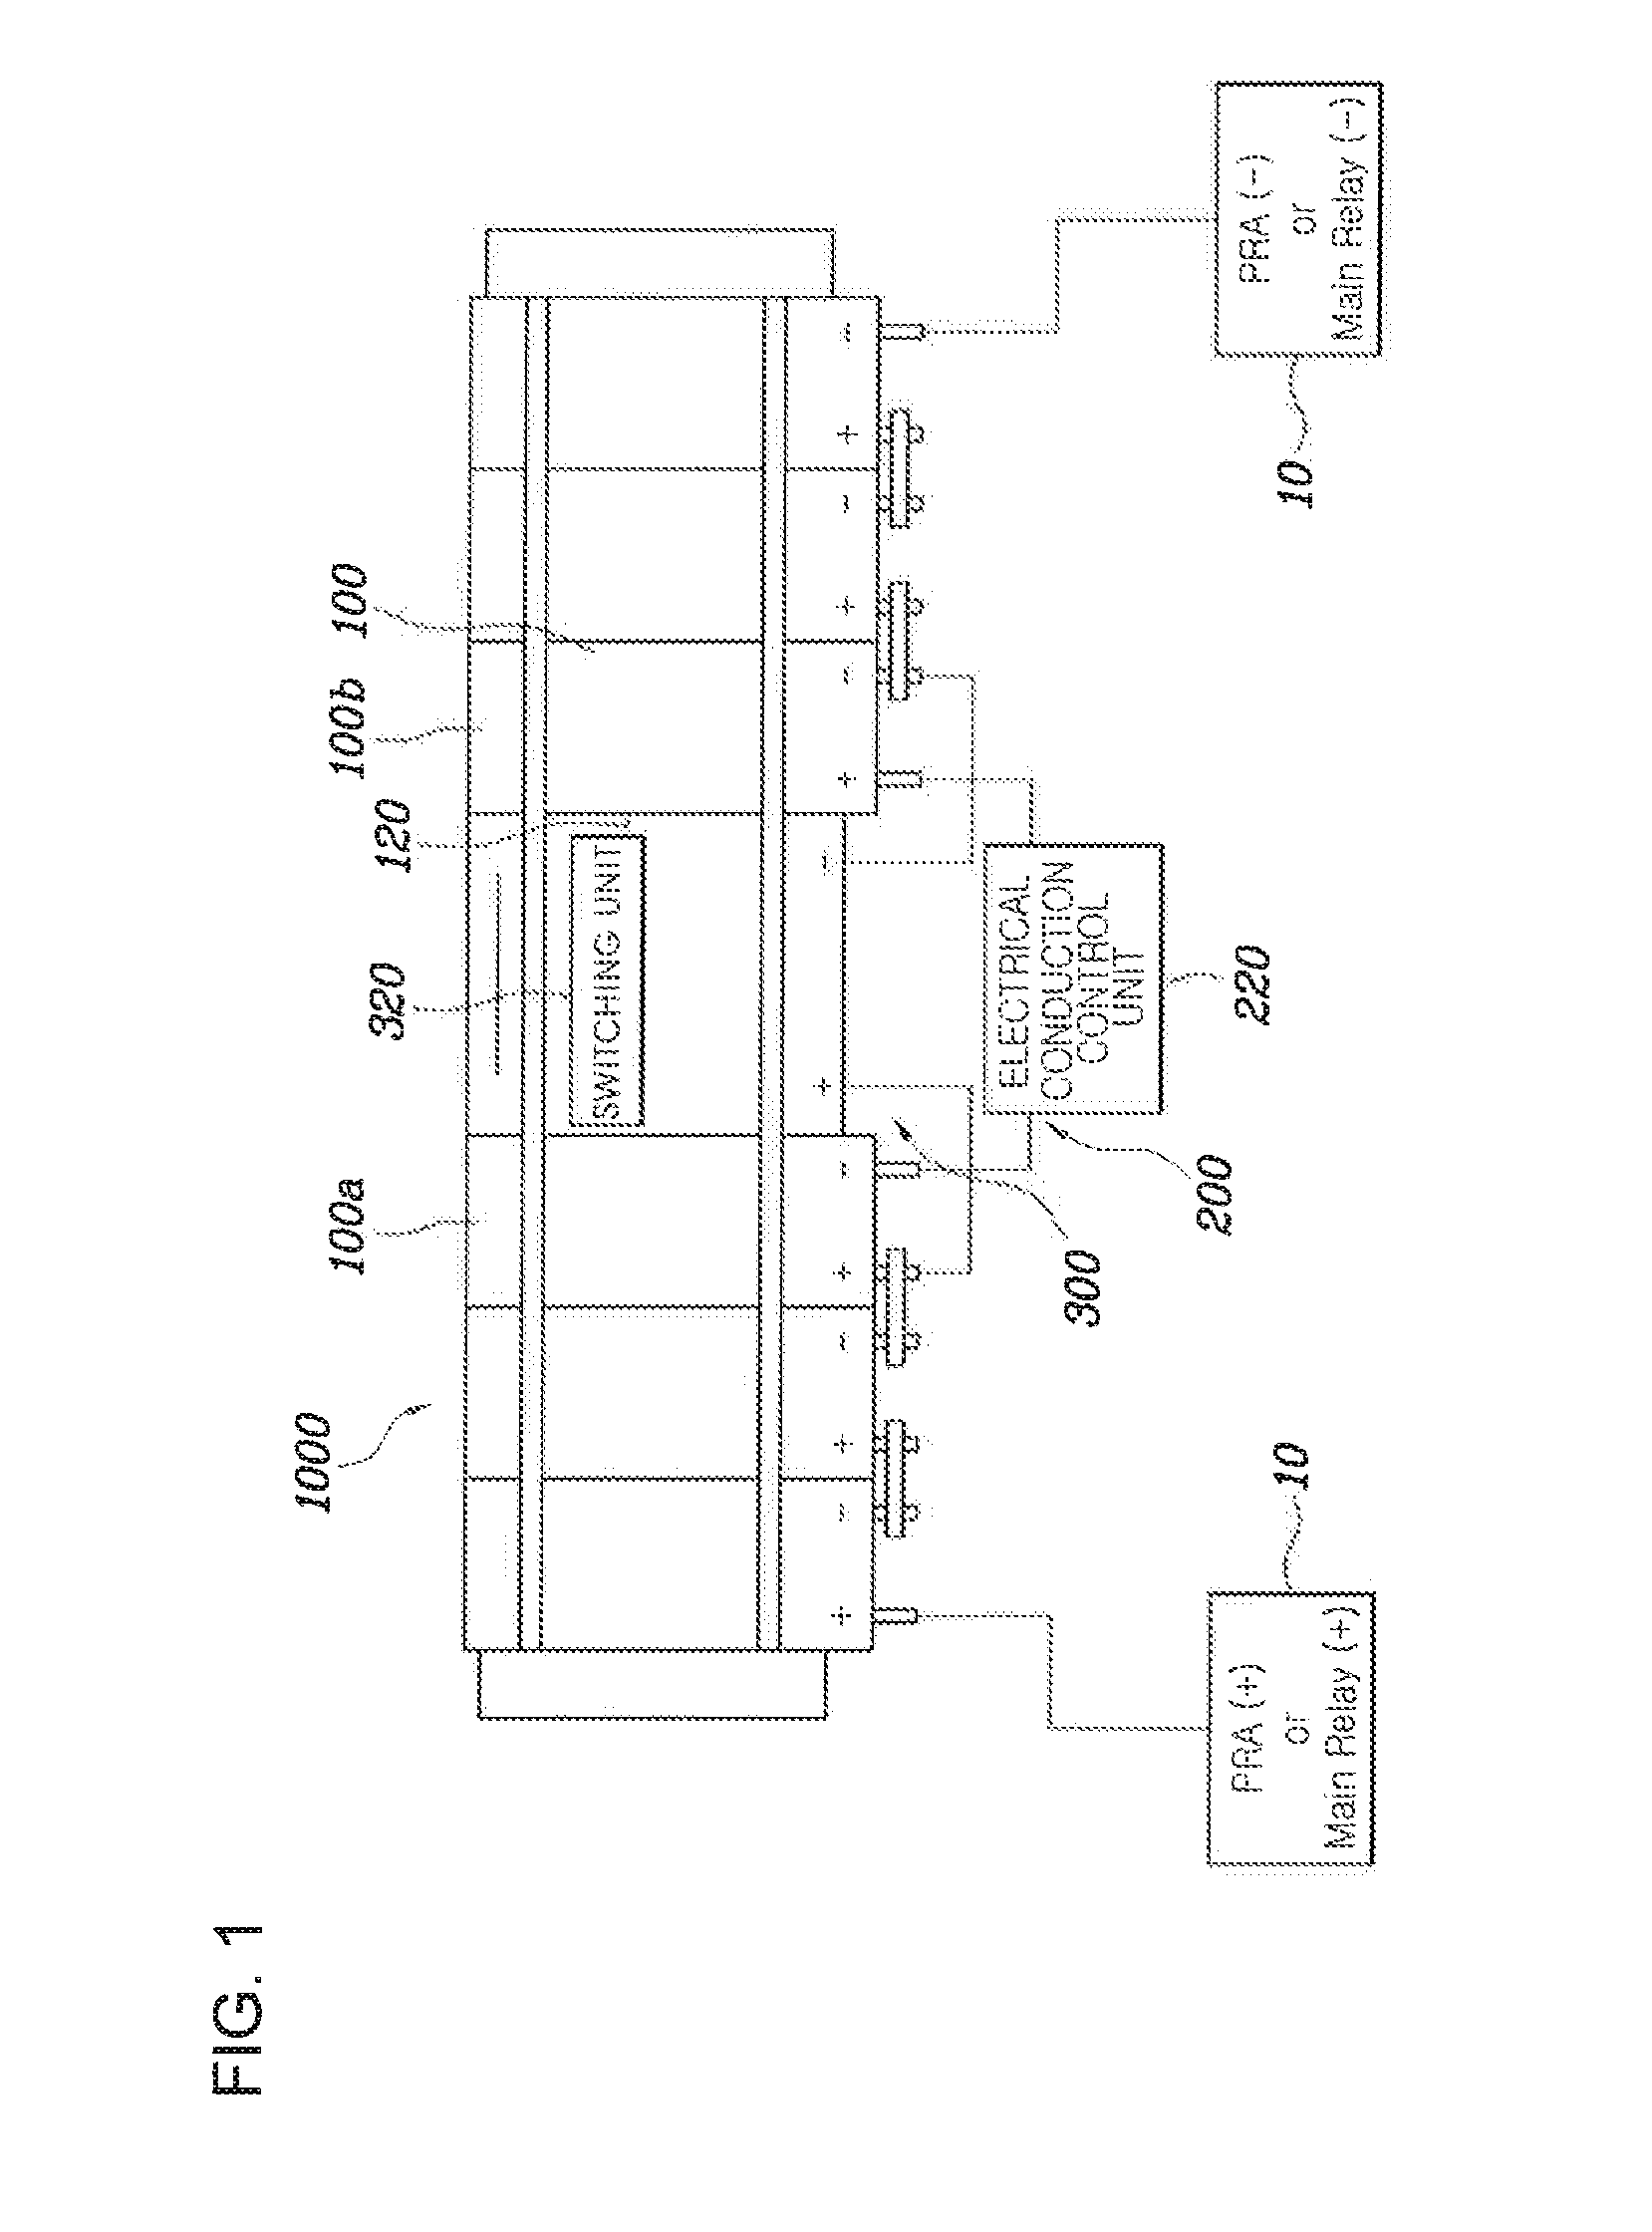 Safety device for preventing overcharging of battery